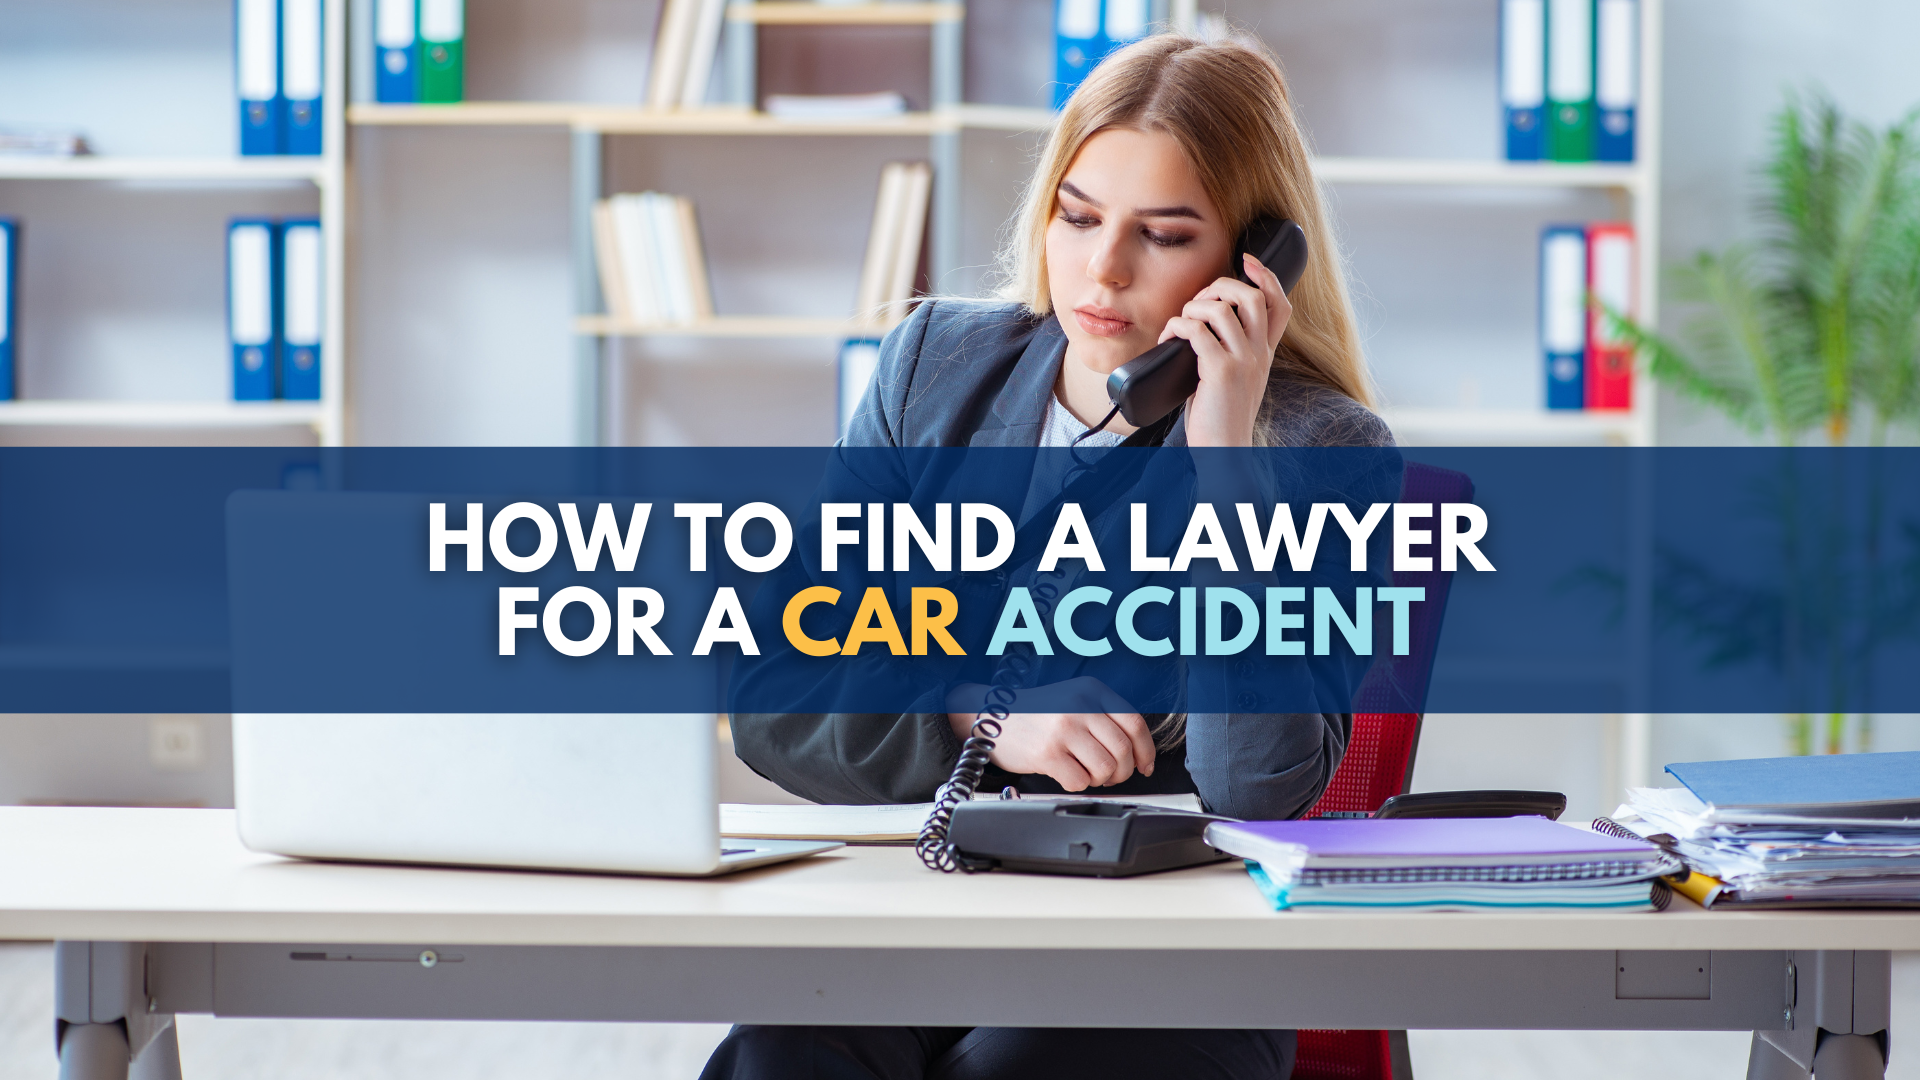 How to find a lawyer for a car accident